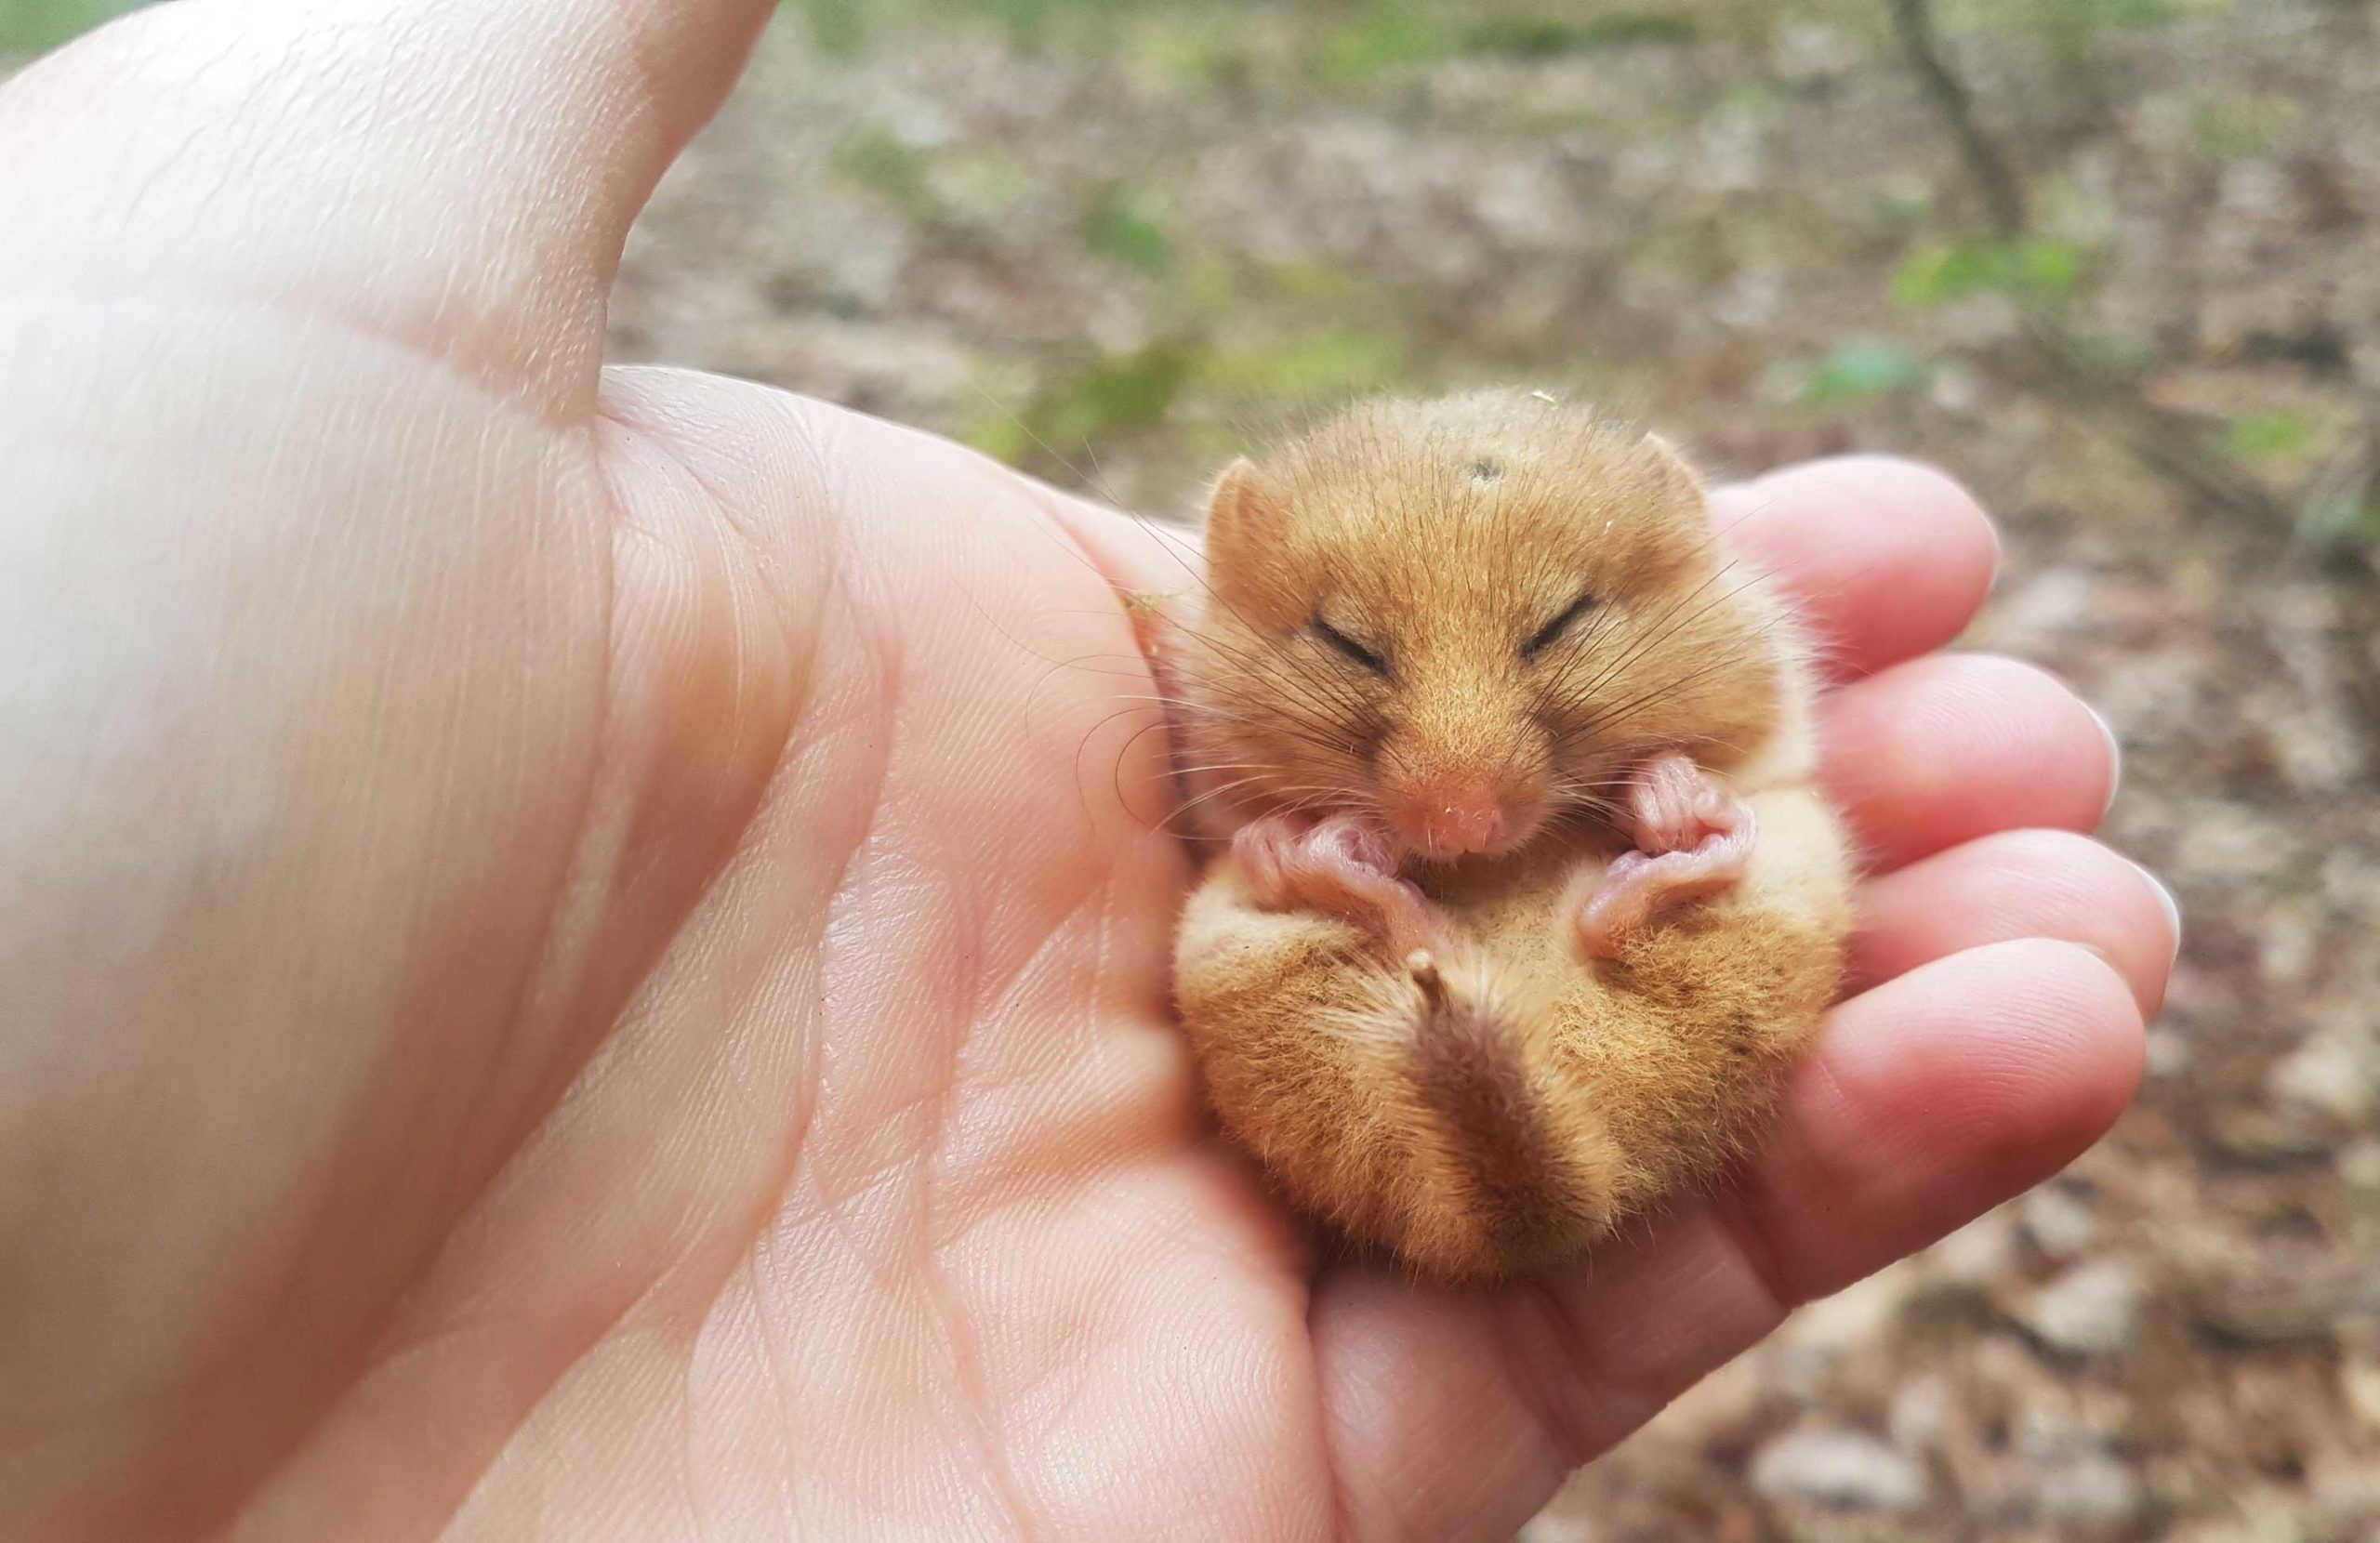 Lorna-Griffiths-dormouse-in-hand-Meet-the-monitors-Dormouse-Week